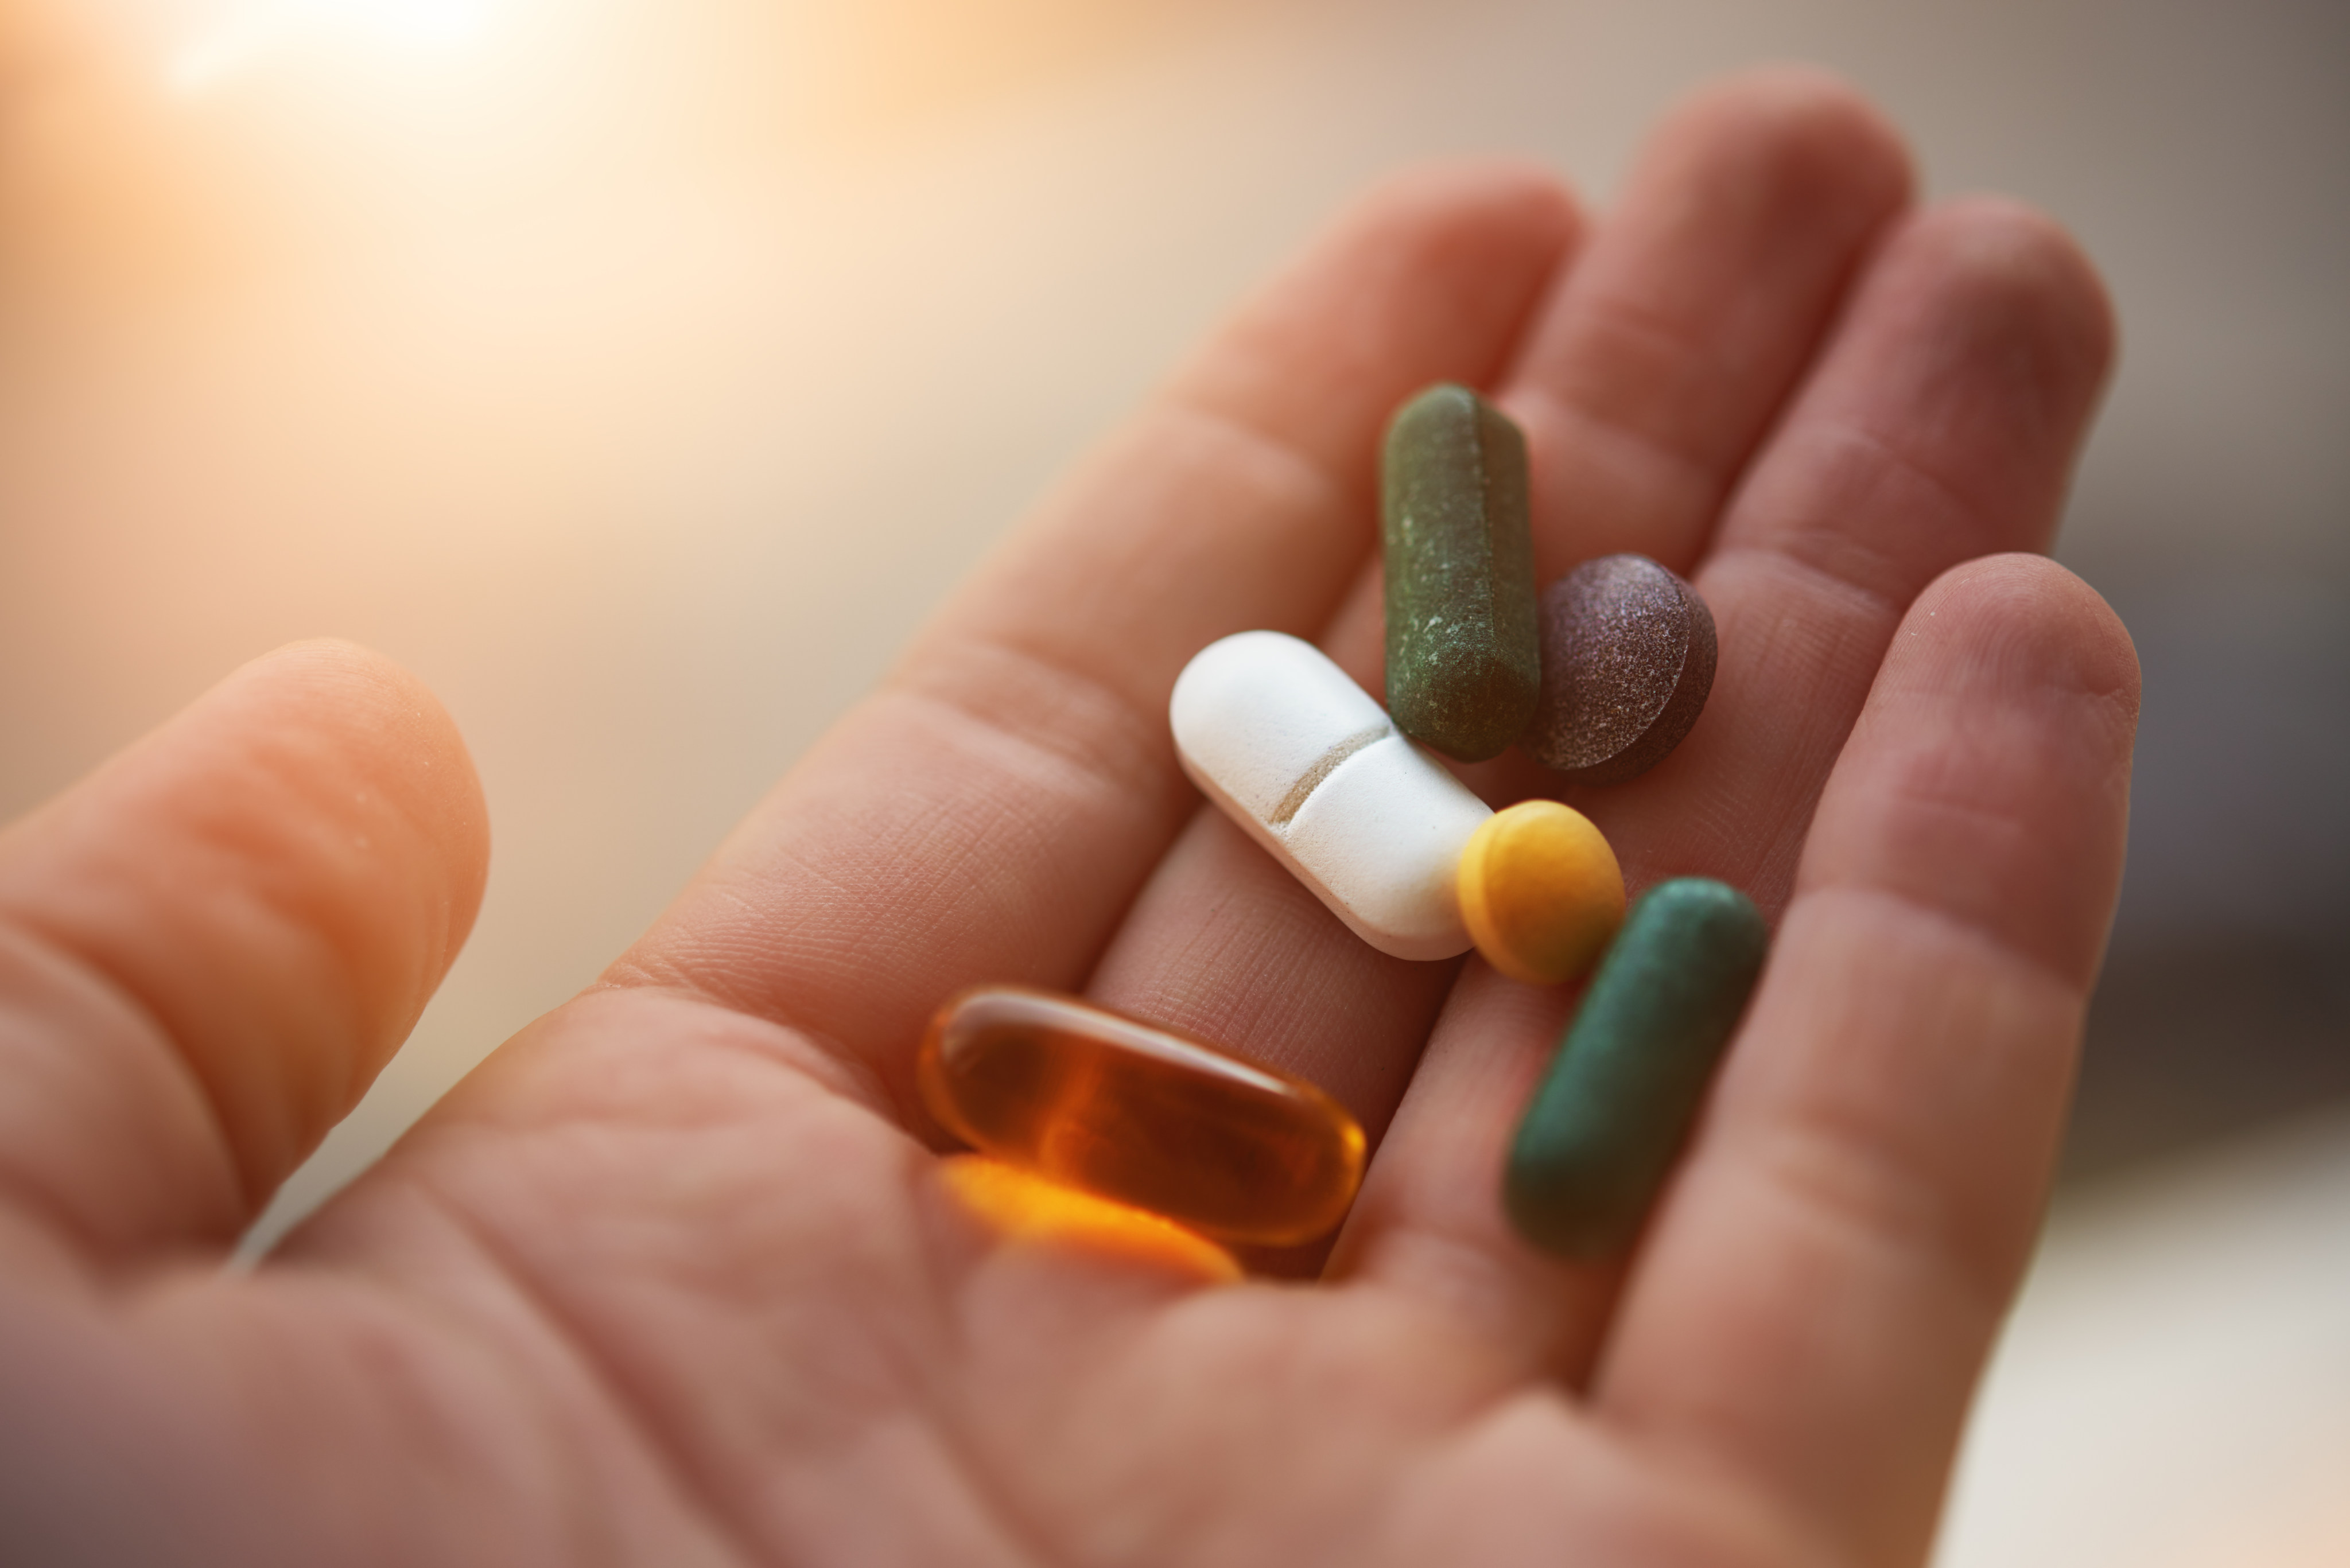 Could daily multivitamins boost your memory? A new study says they might help, especially if you have heart disease. Photo: Getty Images